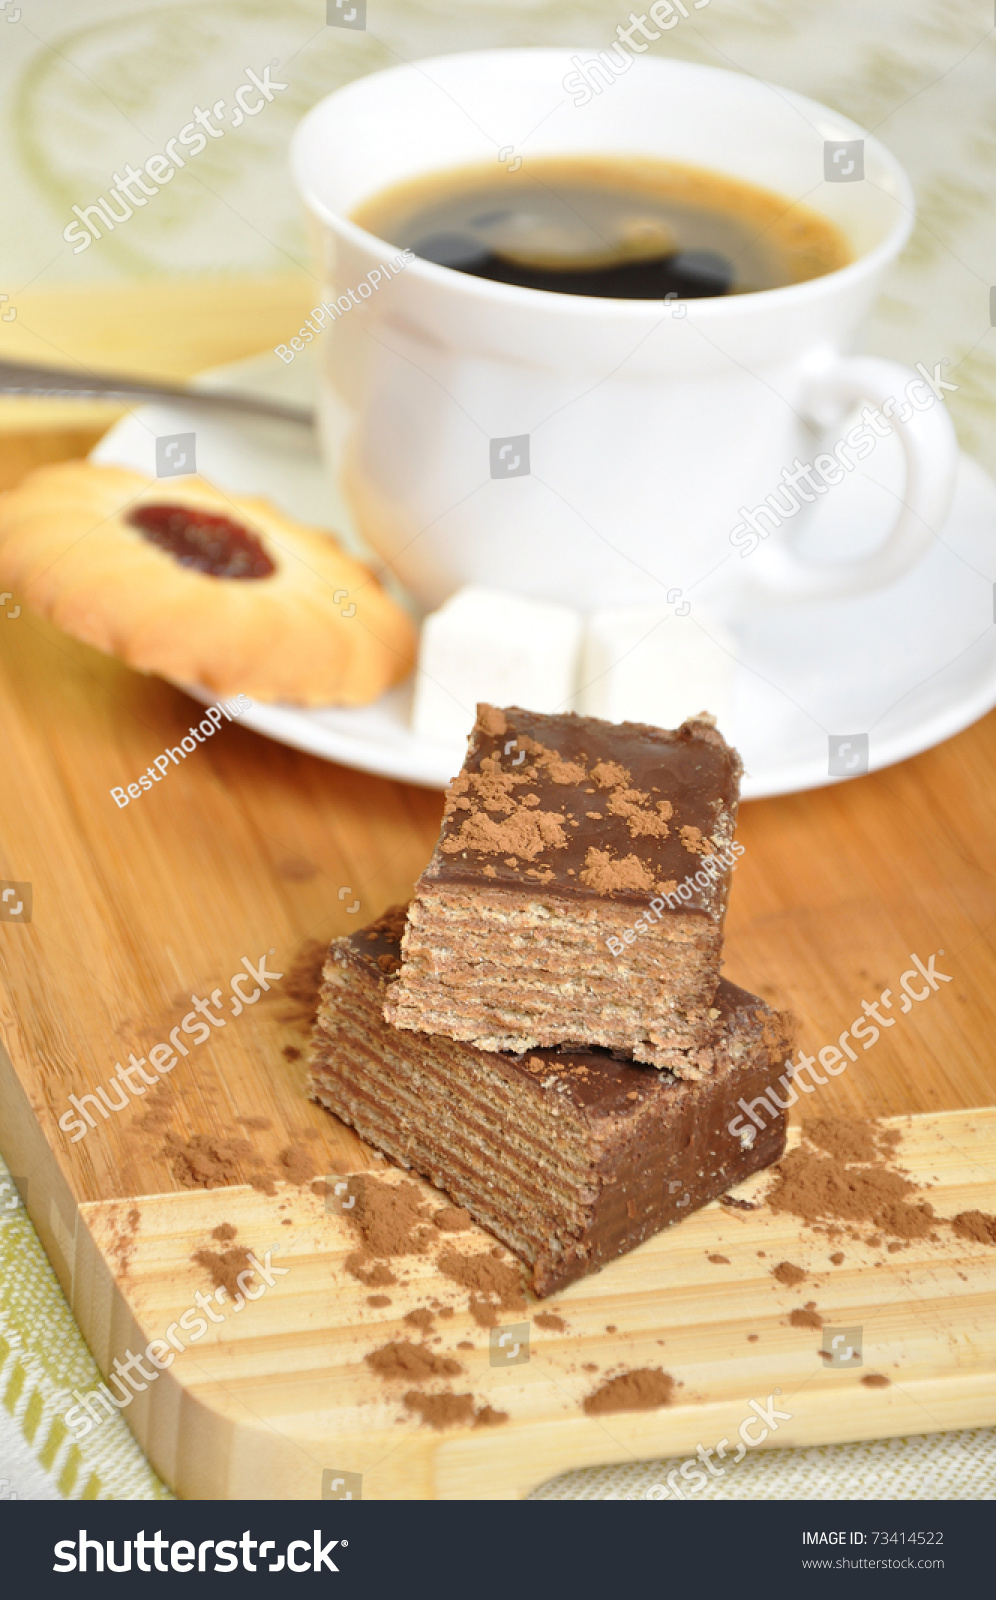 Morning Coffee With Biscuits And Cake Stock Photo 73414522 : Shutterstock